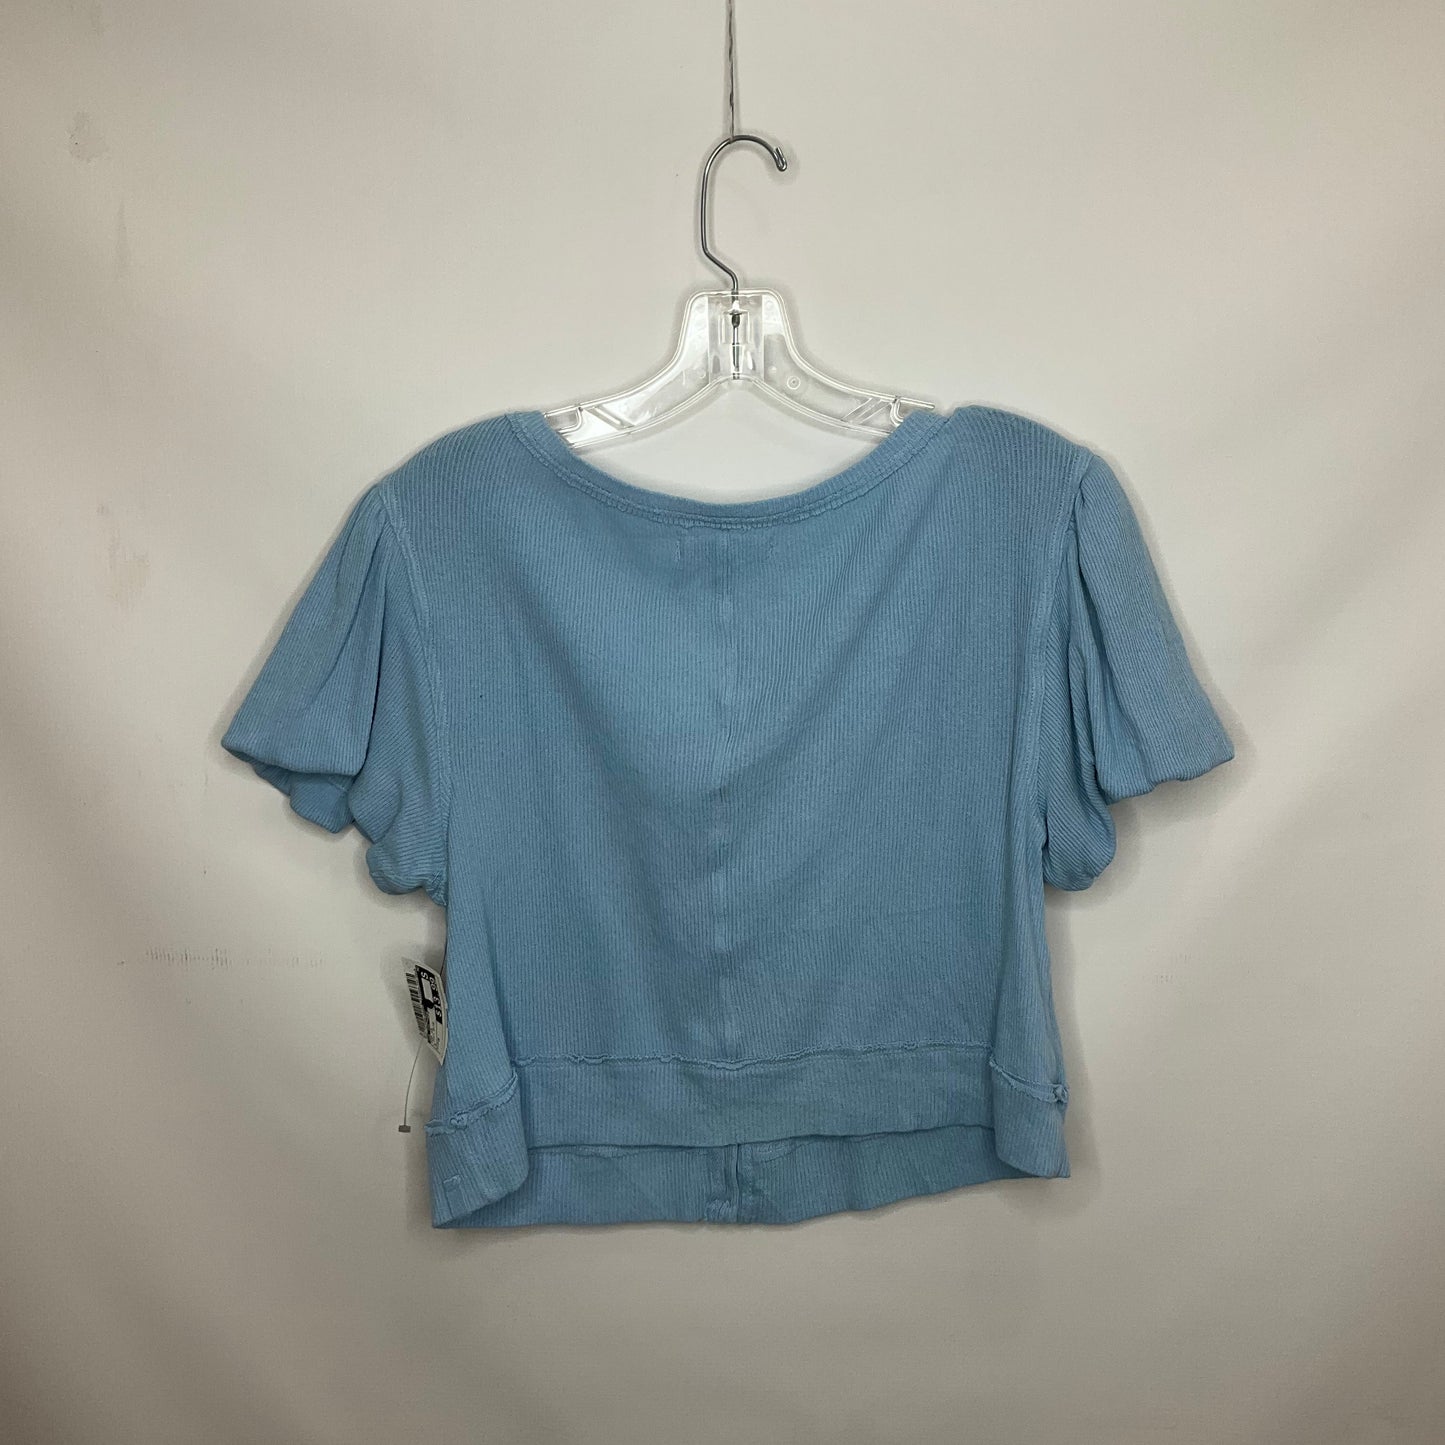 Light Blue Top Short Sleeve We The Free, Size M